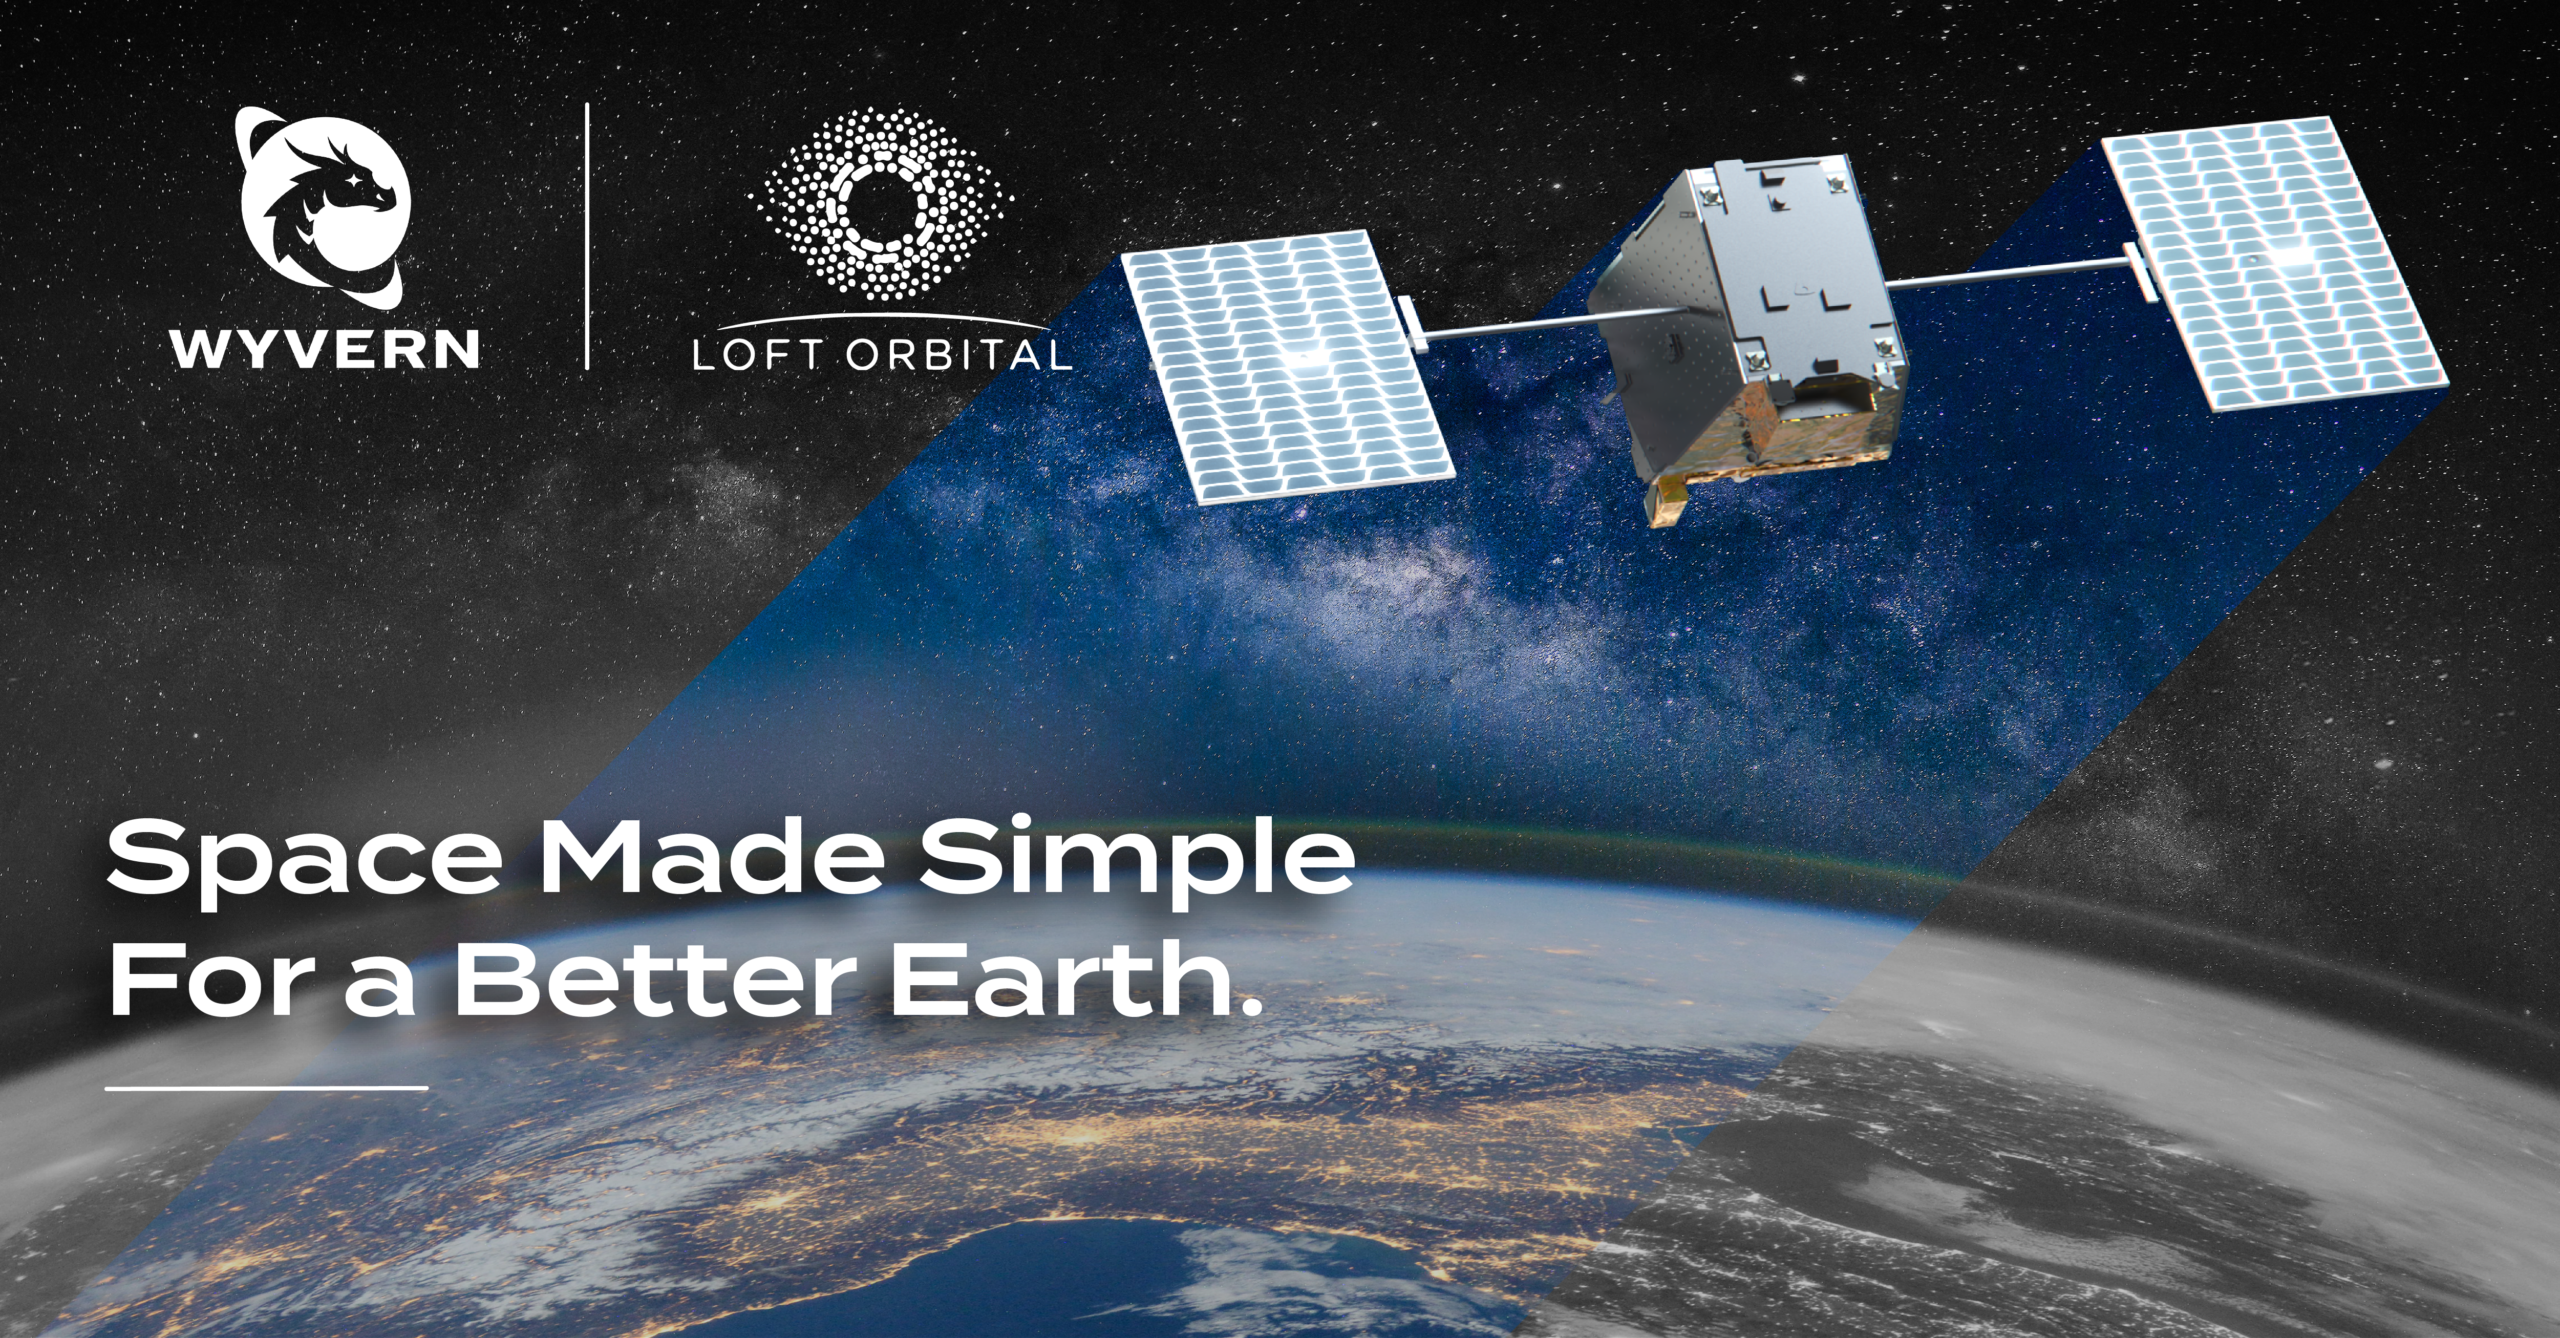 Wyvern selects Loft to expand the Dragonette Constellation. The image shows a rendering of a Loft spacecraft and the tagline "Space Made Simple for a Better Earth."